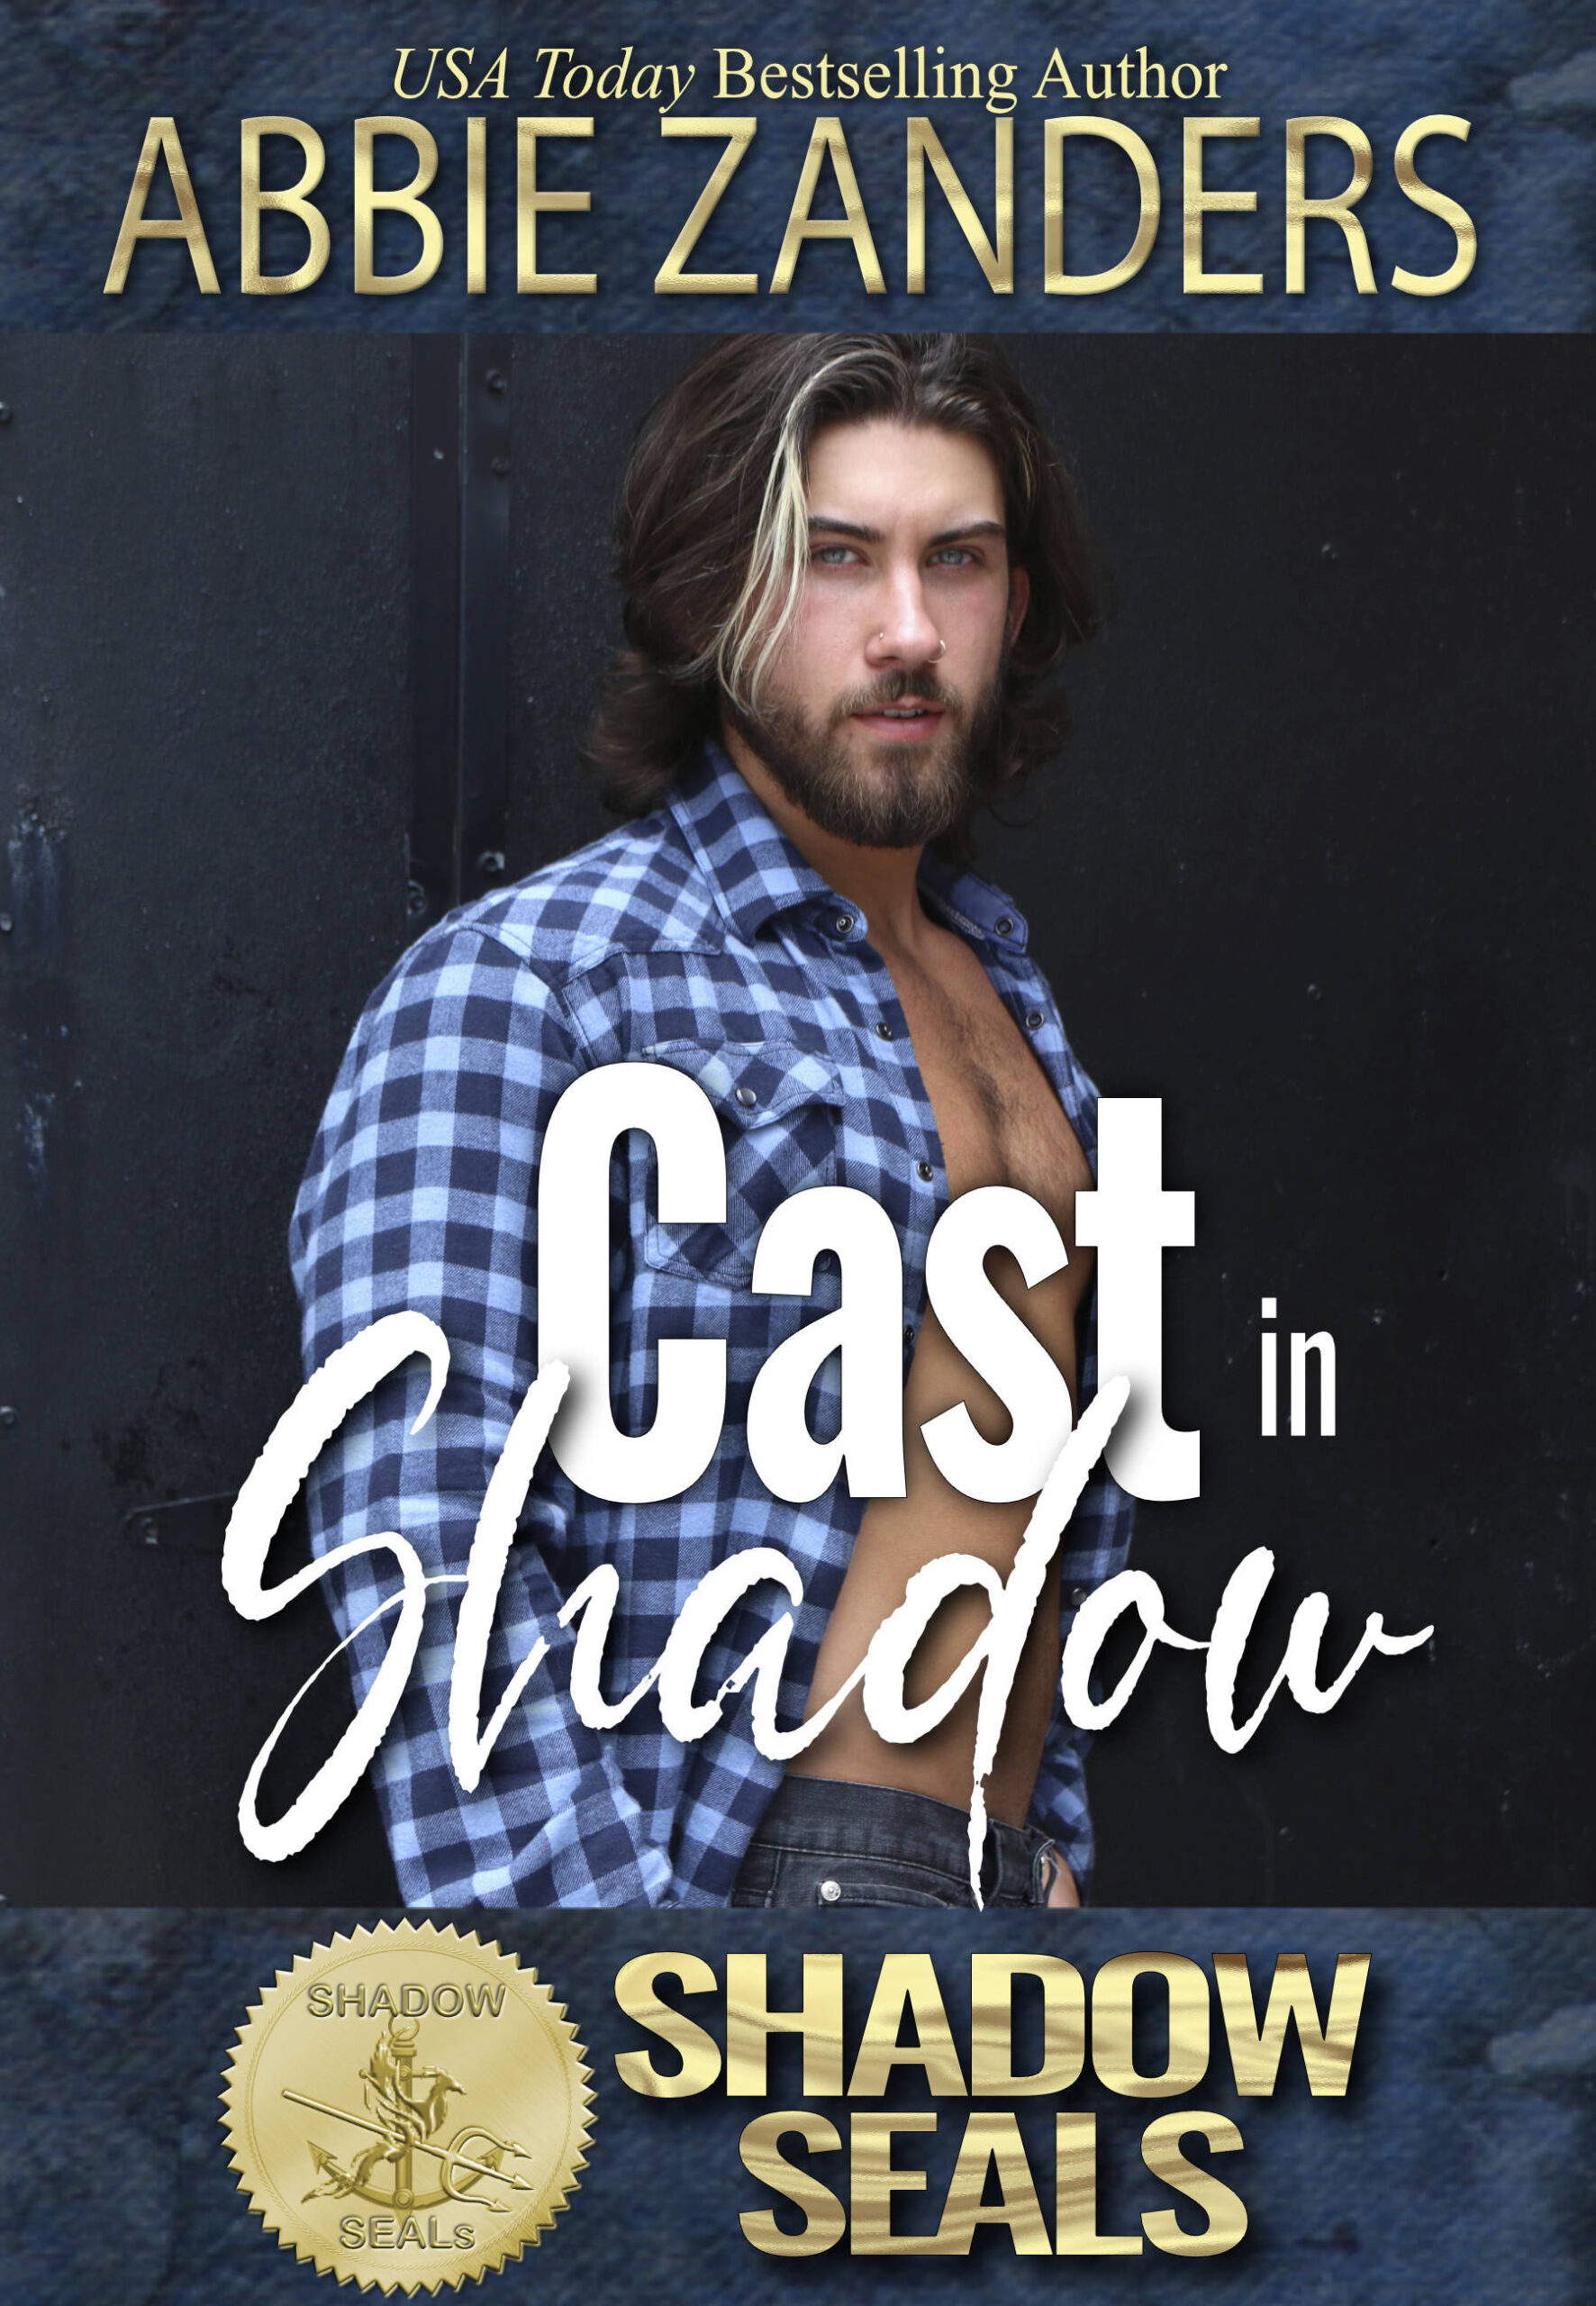 Cast in Shadows Book by Author Abbie Zanders